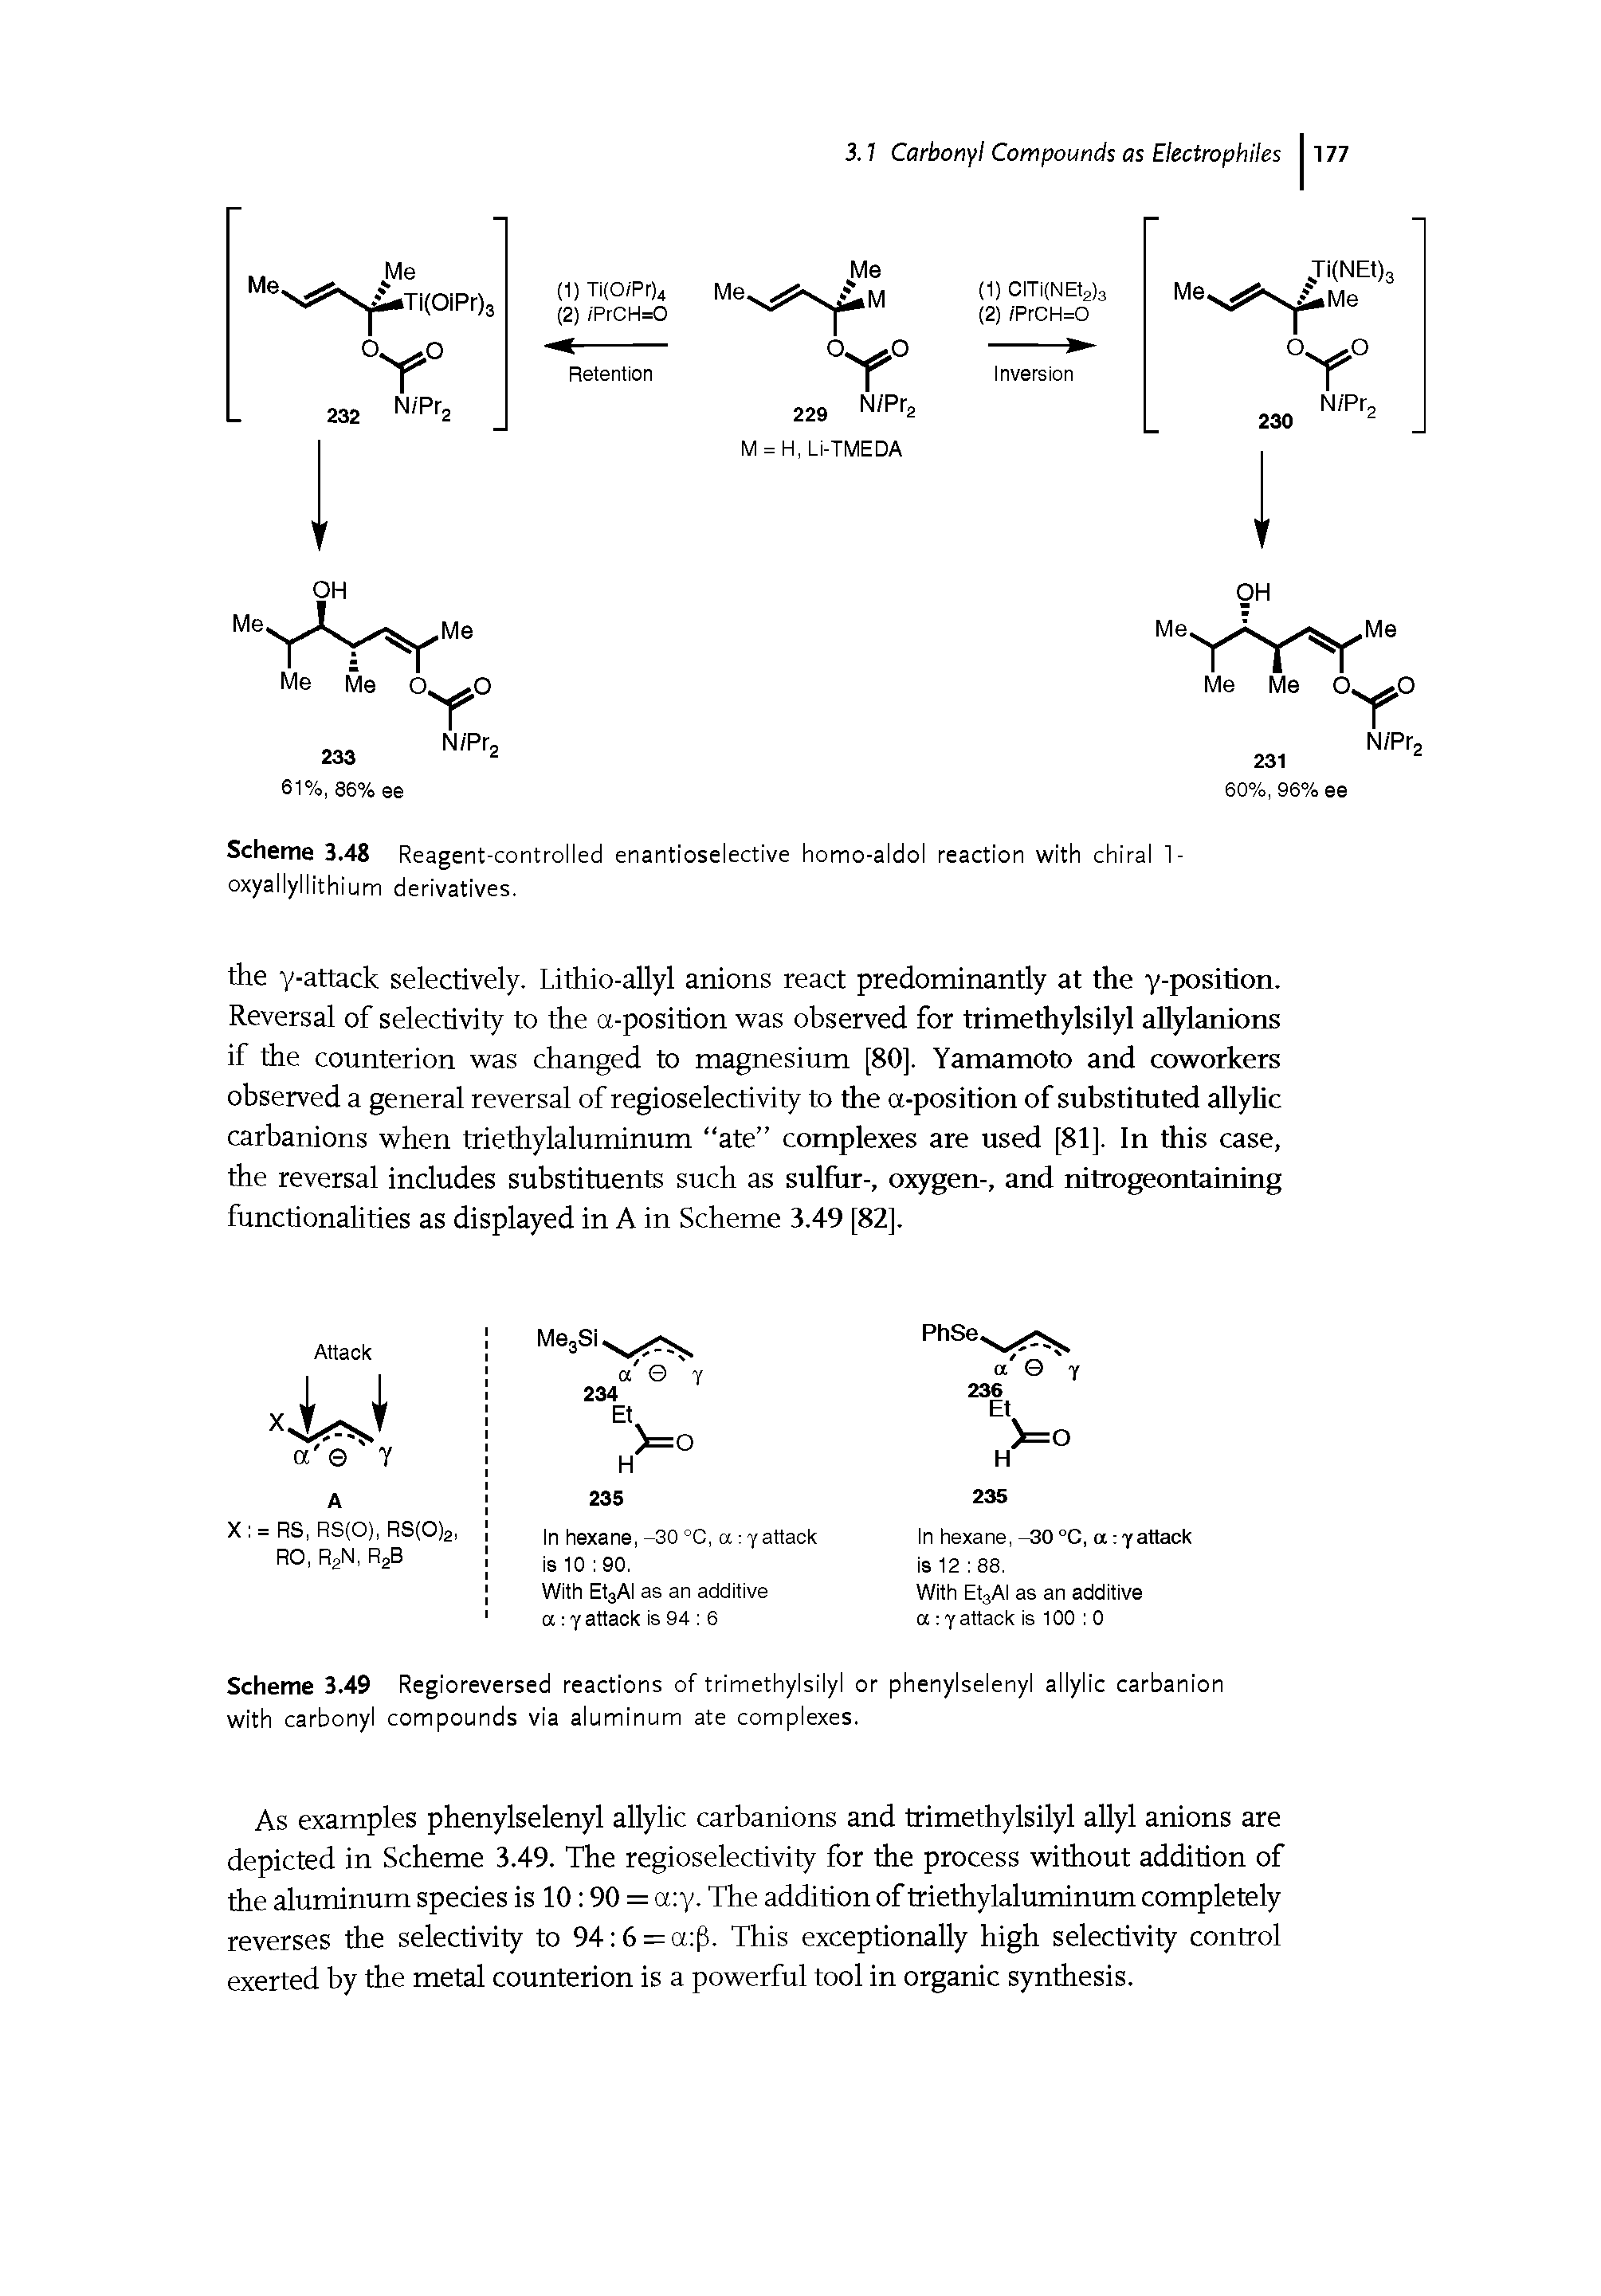 Scheme 3.48 Reagent-controlled enantioselective homo-aldol reaction with chiral 1-oxyallyllithium derivatives.